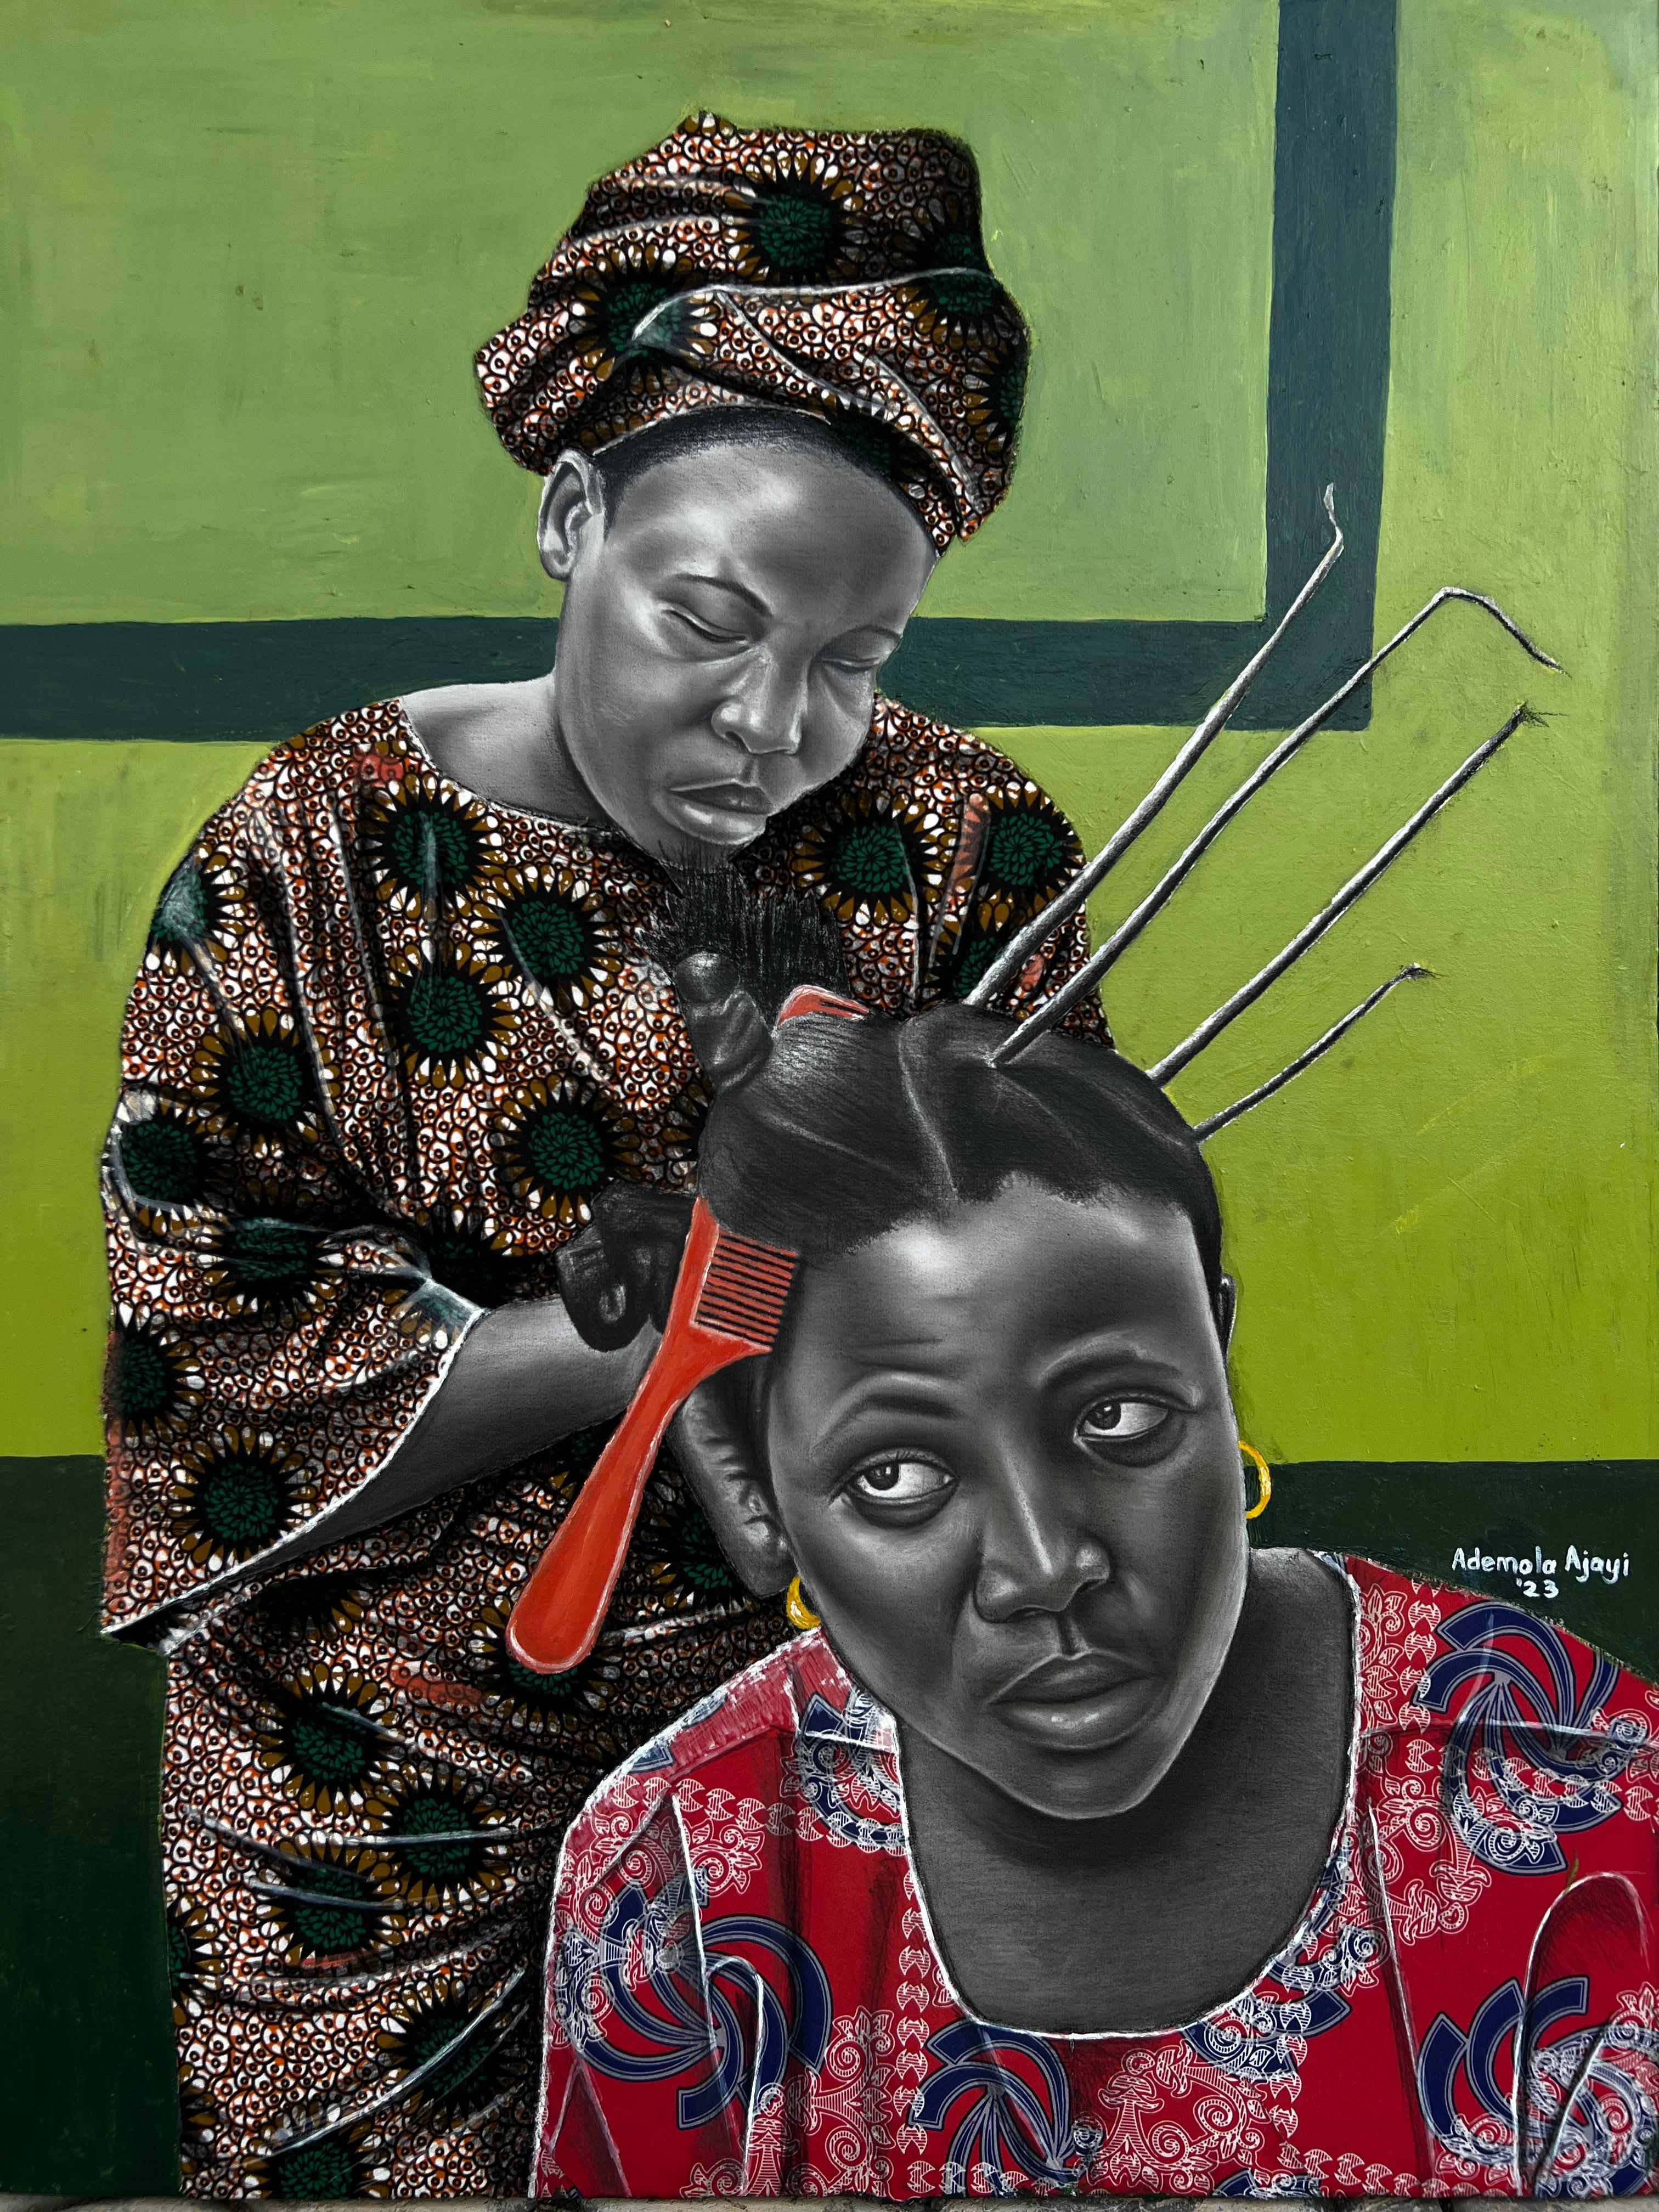 Ademola Clement Ajayi Portrait Painting - For Tomorrow's Festival 